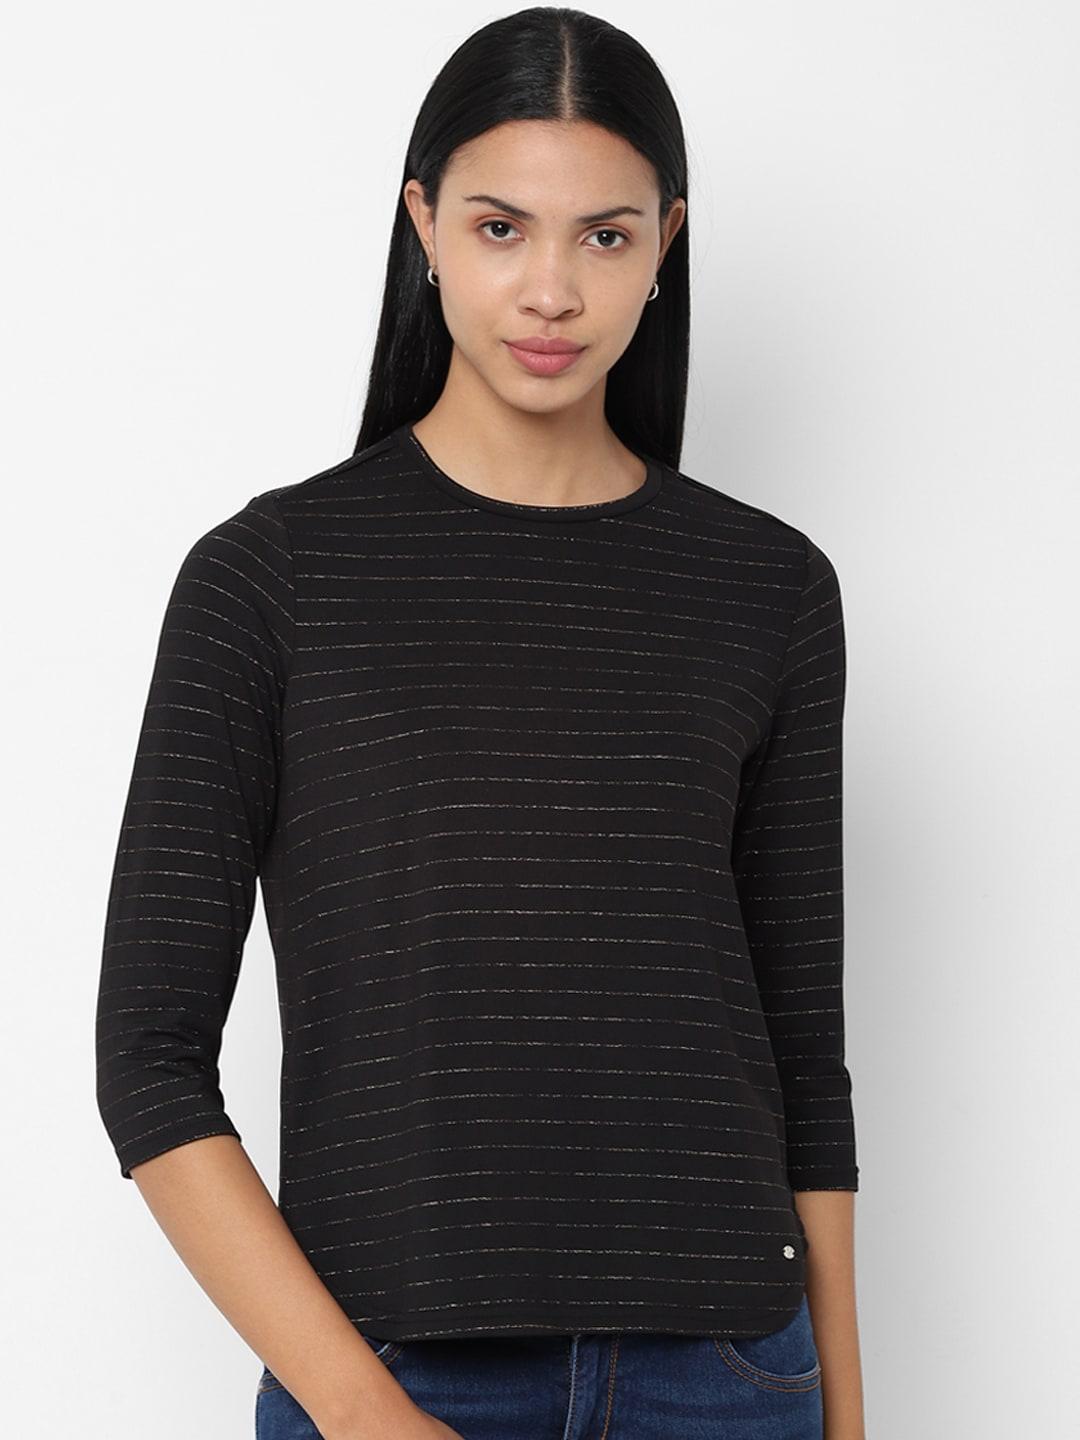 allen-solly-woman-black-striped-knitted-top